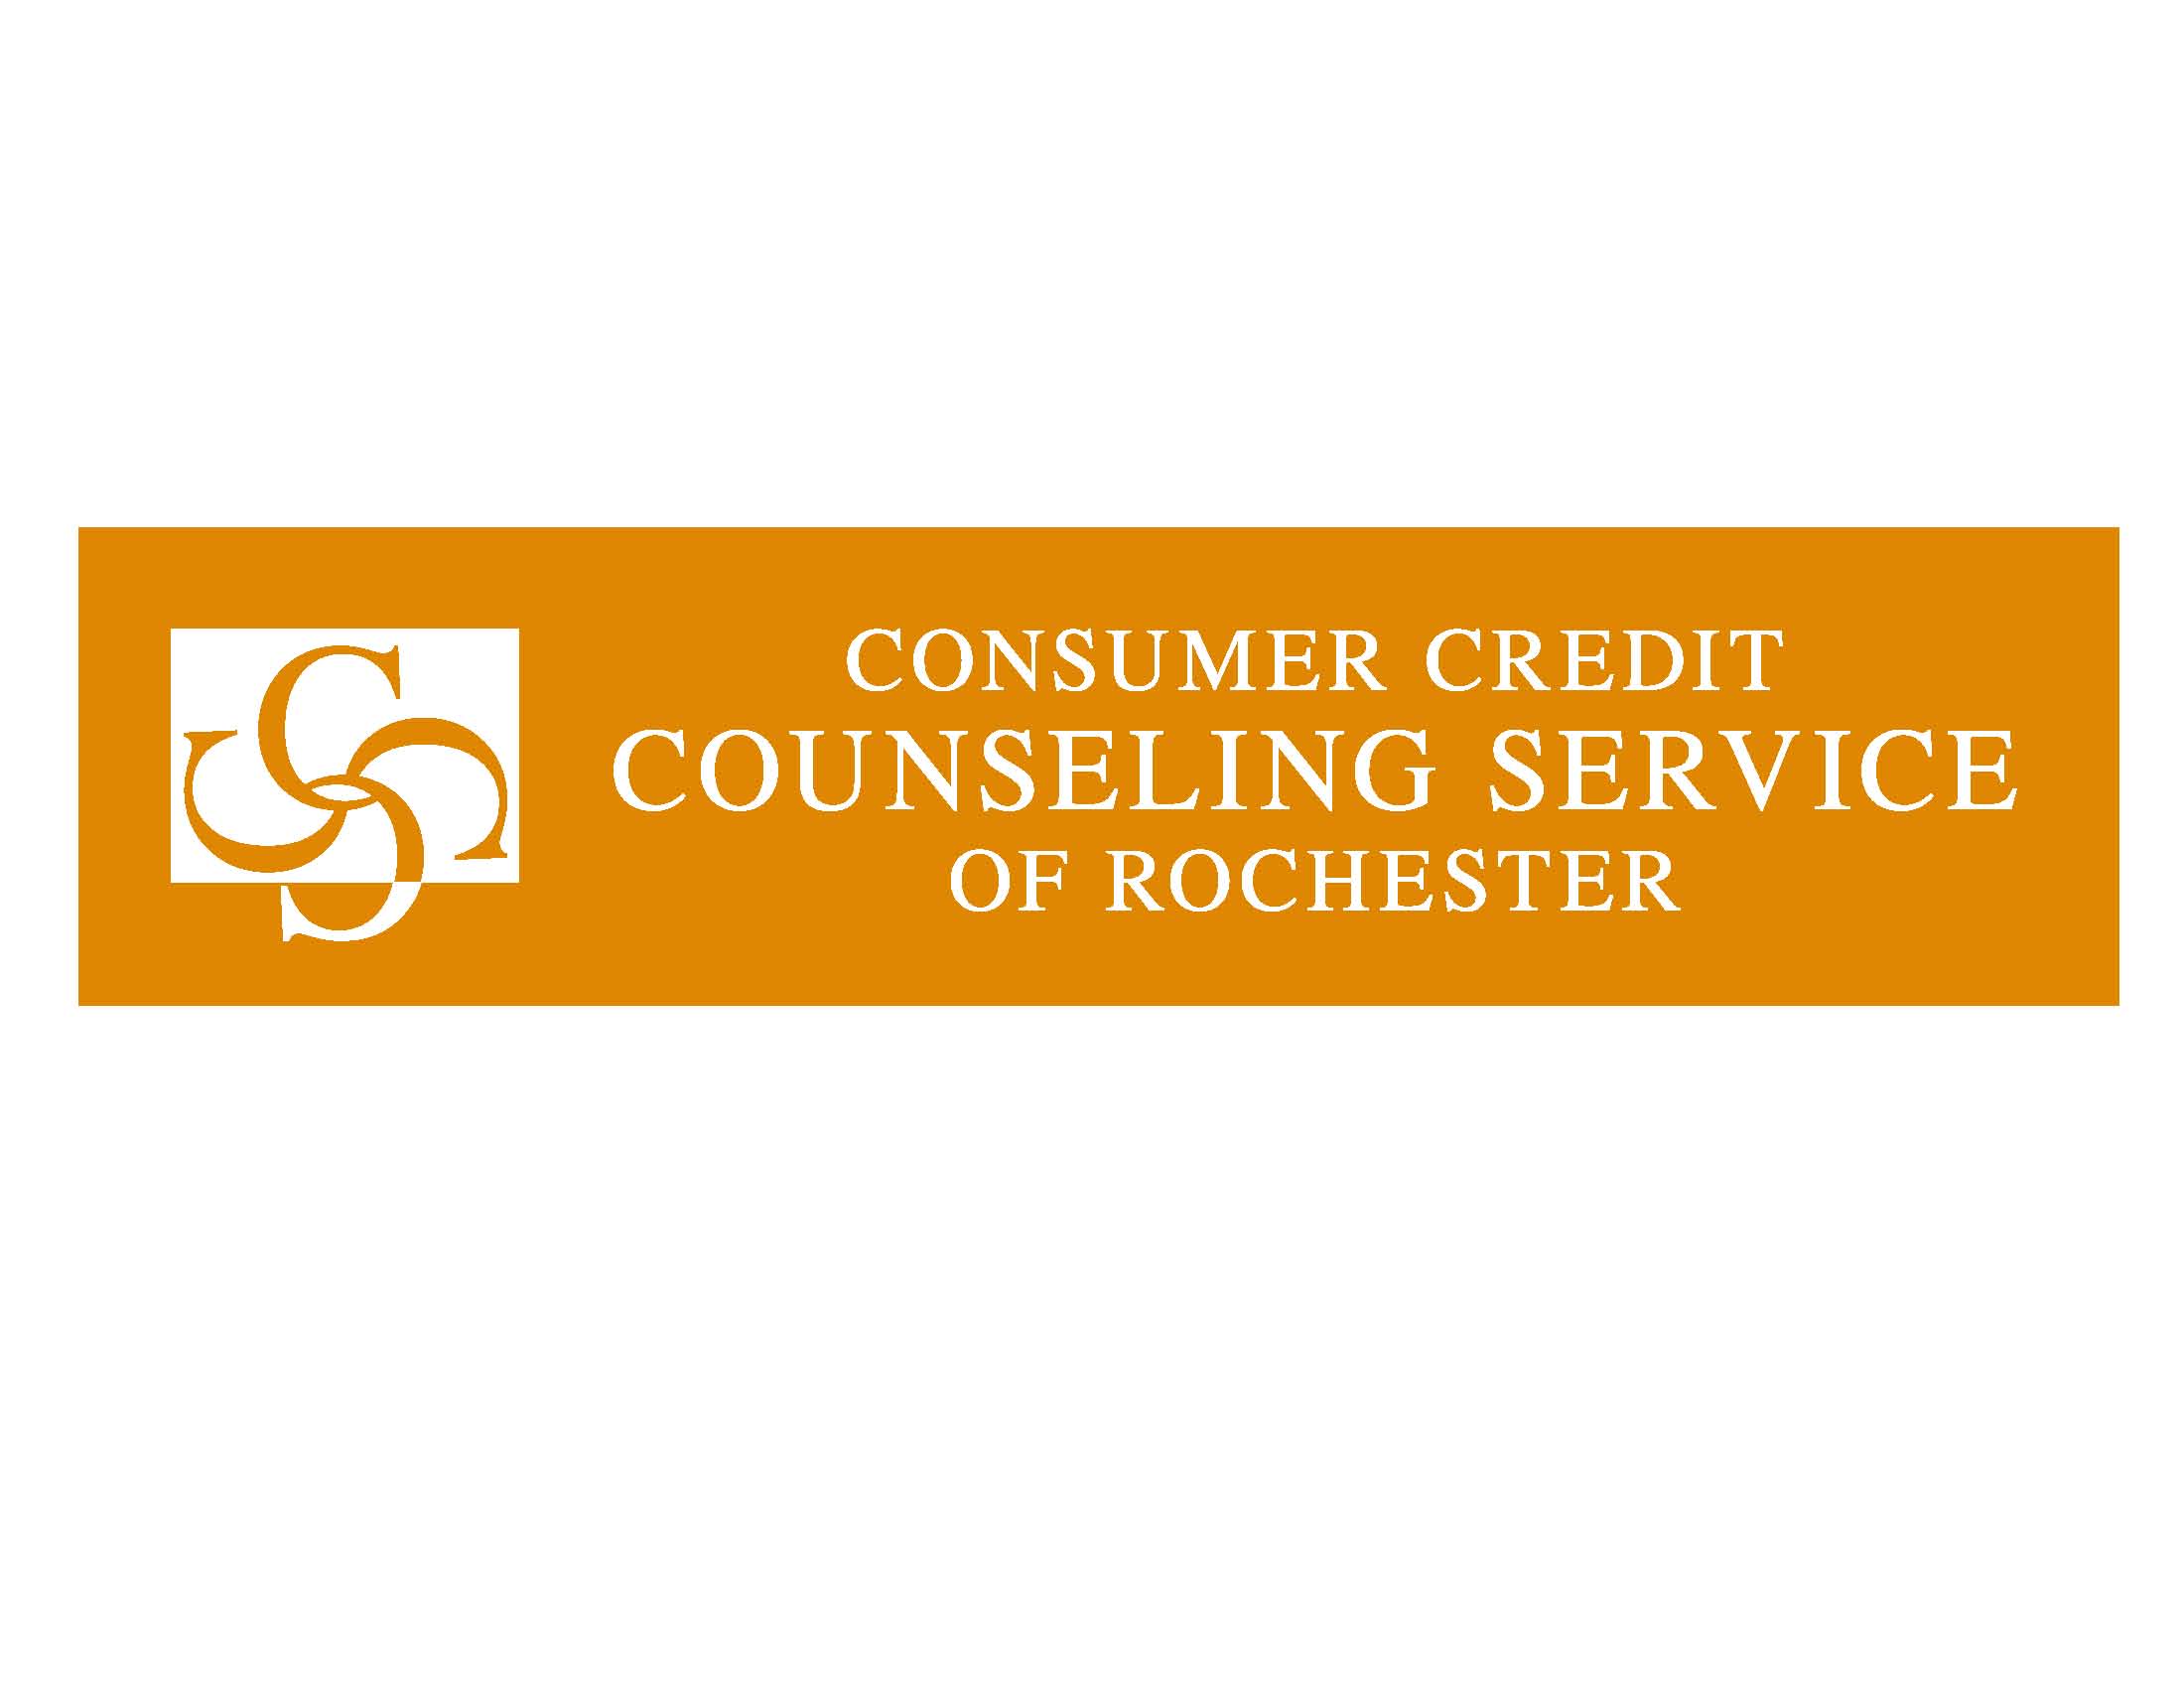 Consumer Credit Counseling Service of Rochester